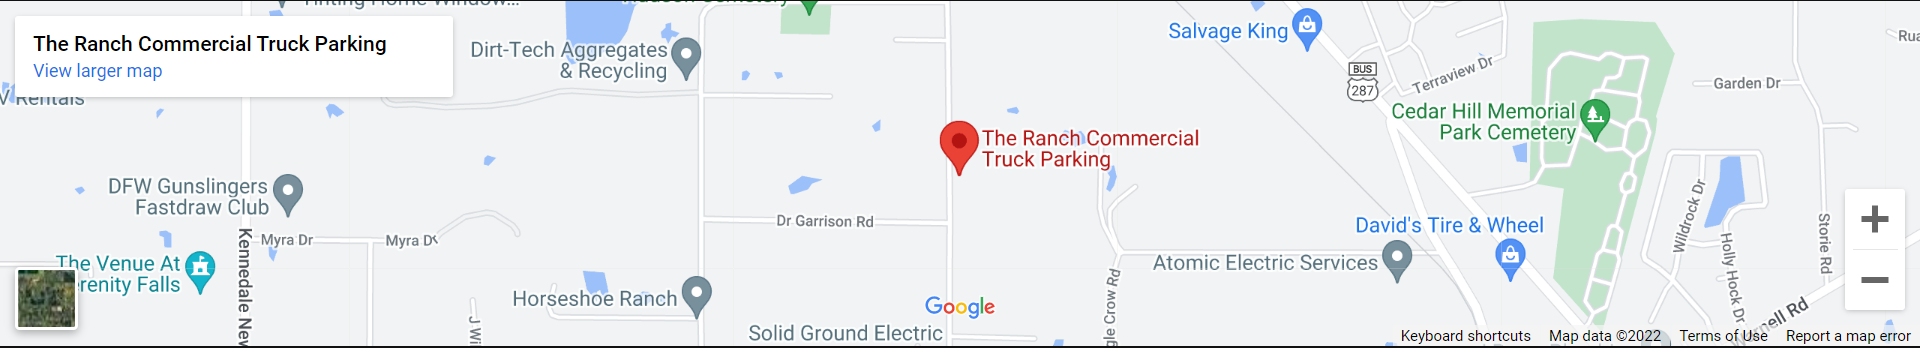 The Ranch Truck Parking map